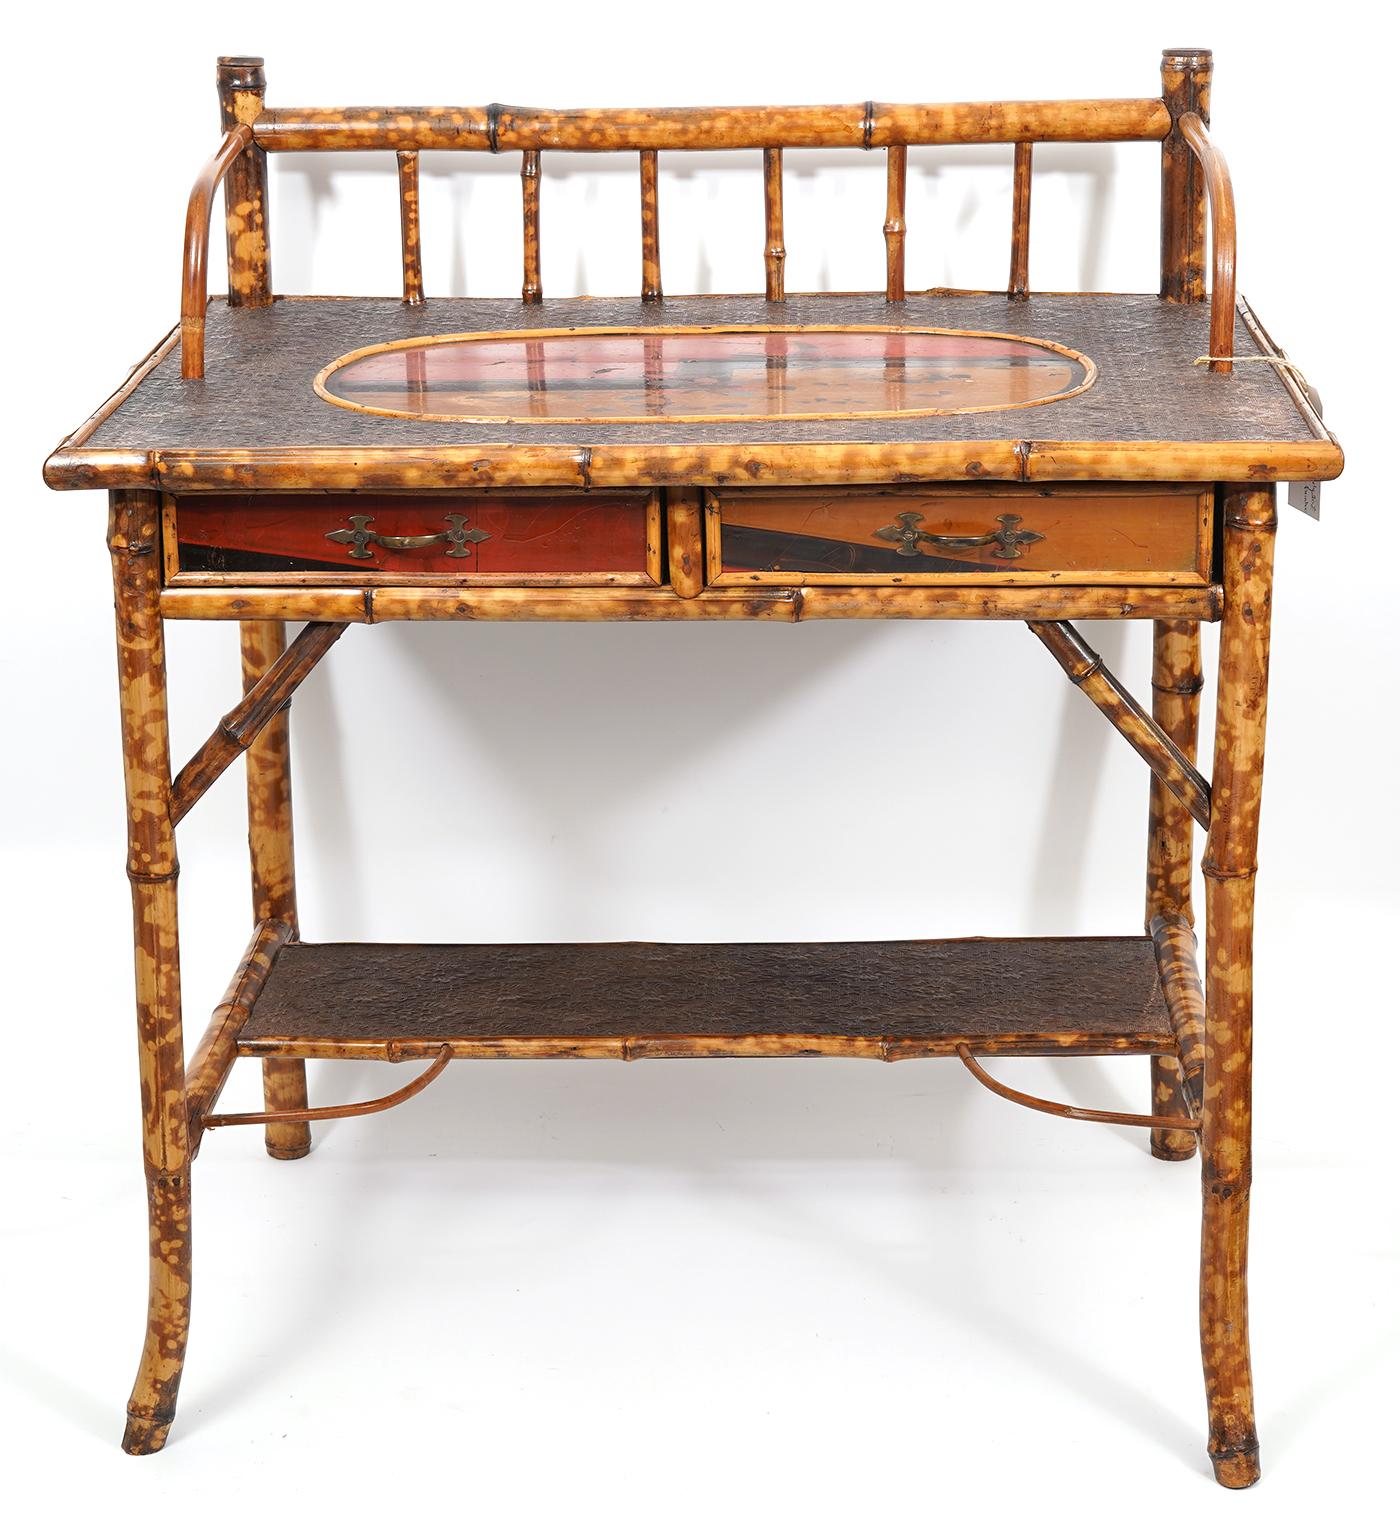 This early 20th century English bamboo writing desk features an embossed leather lined top centering an oval Zen style lacquered image with birds and blossoming plants above two similarly japanned fronted drawers. The slightly splayed legs are